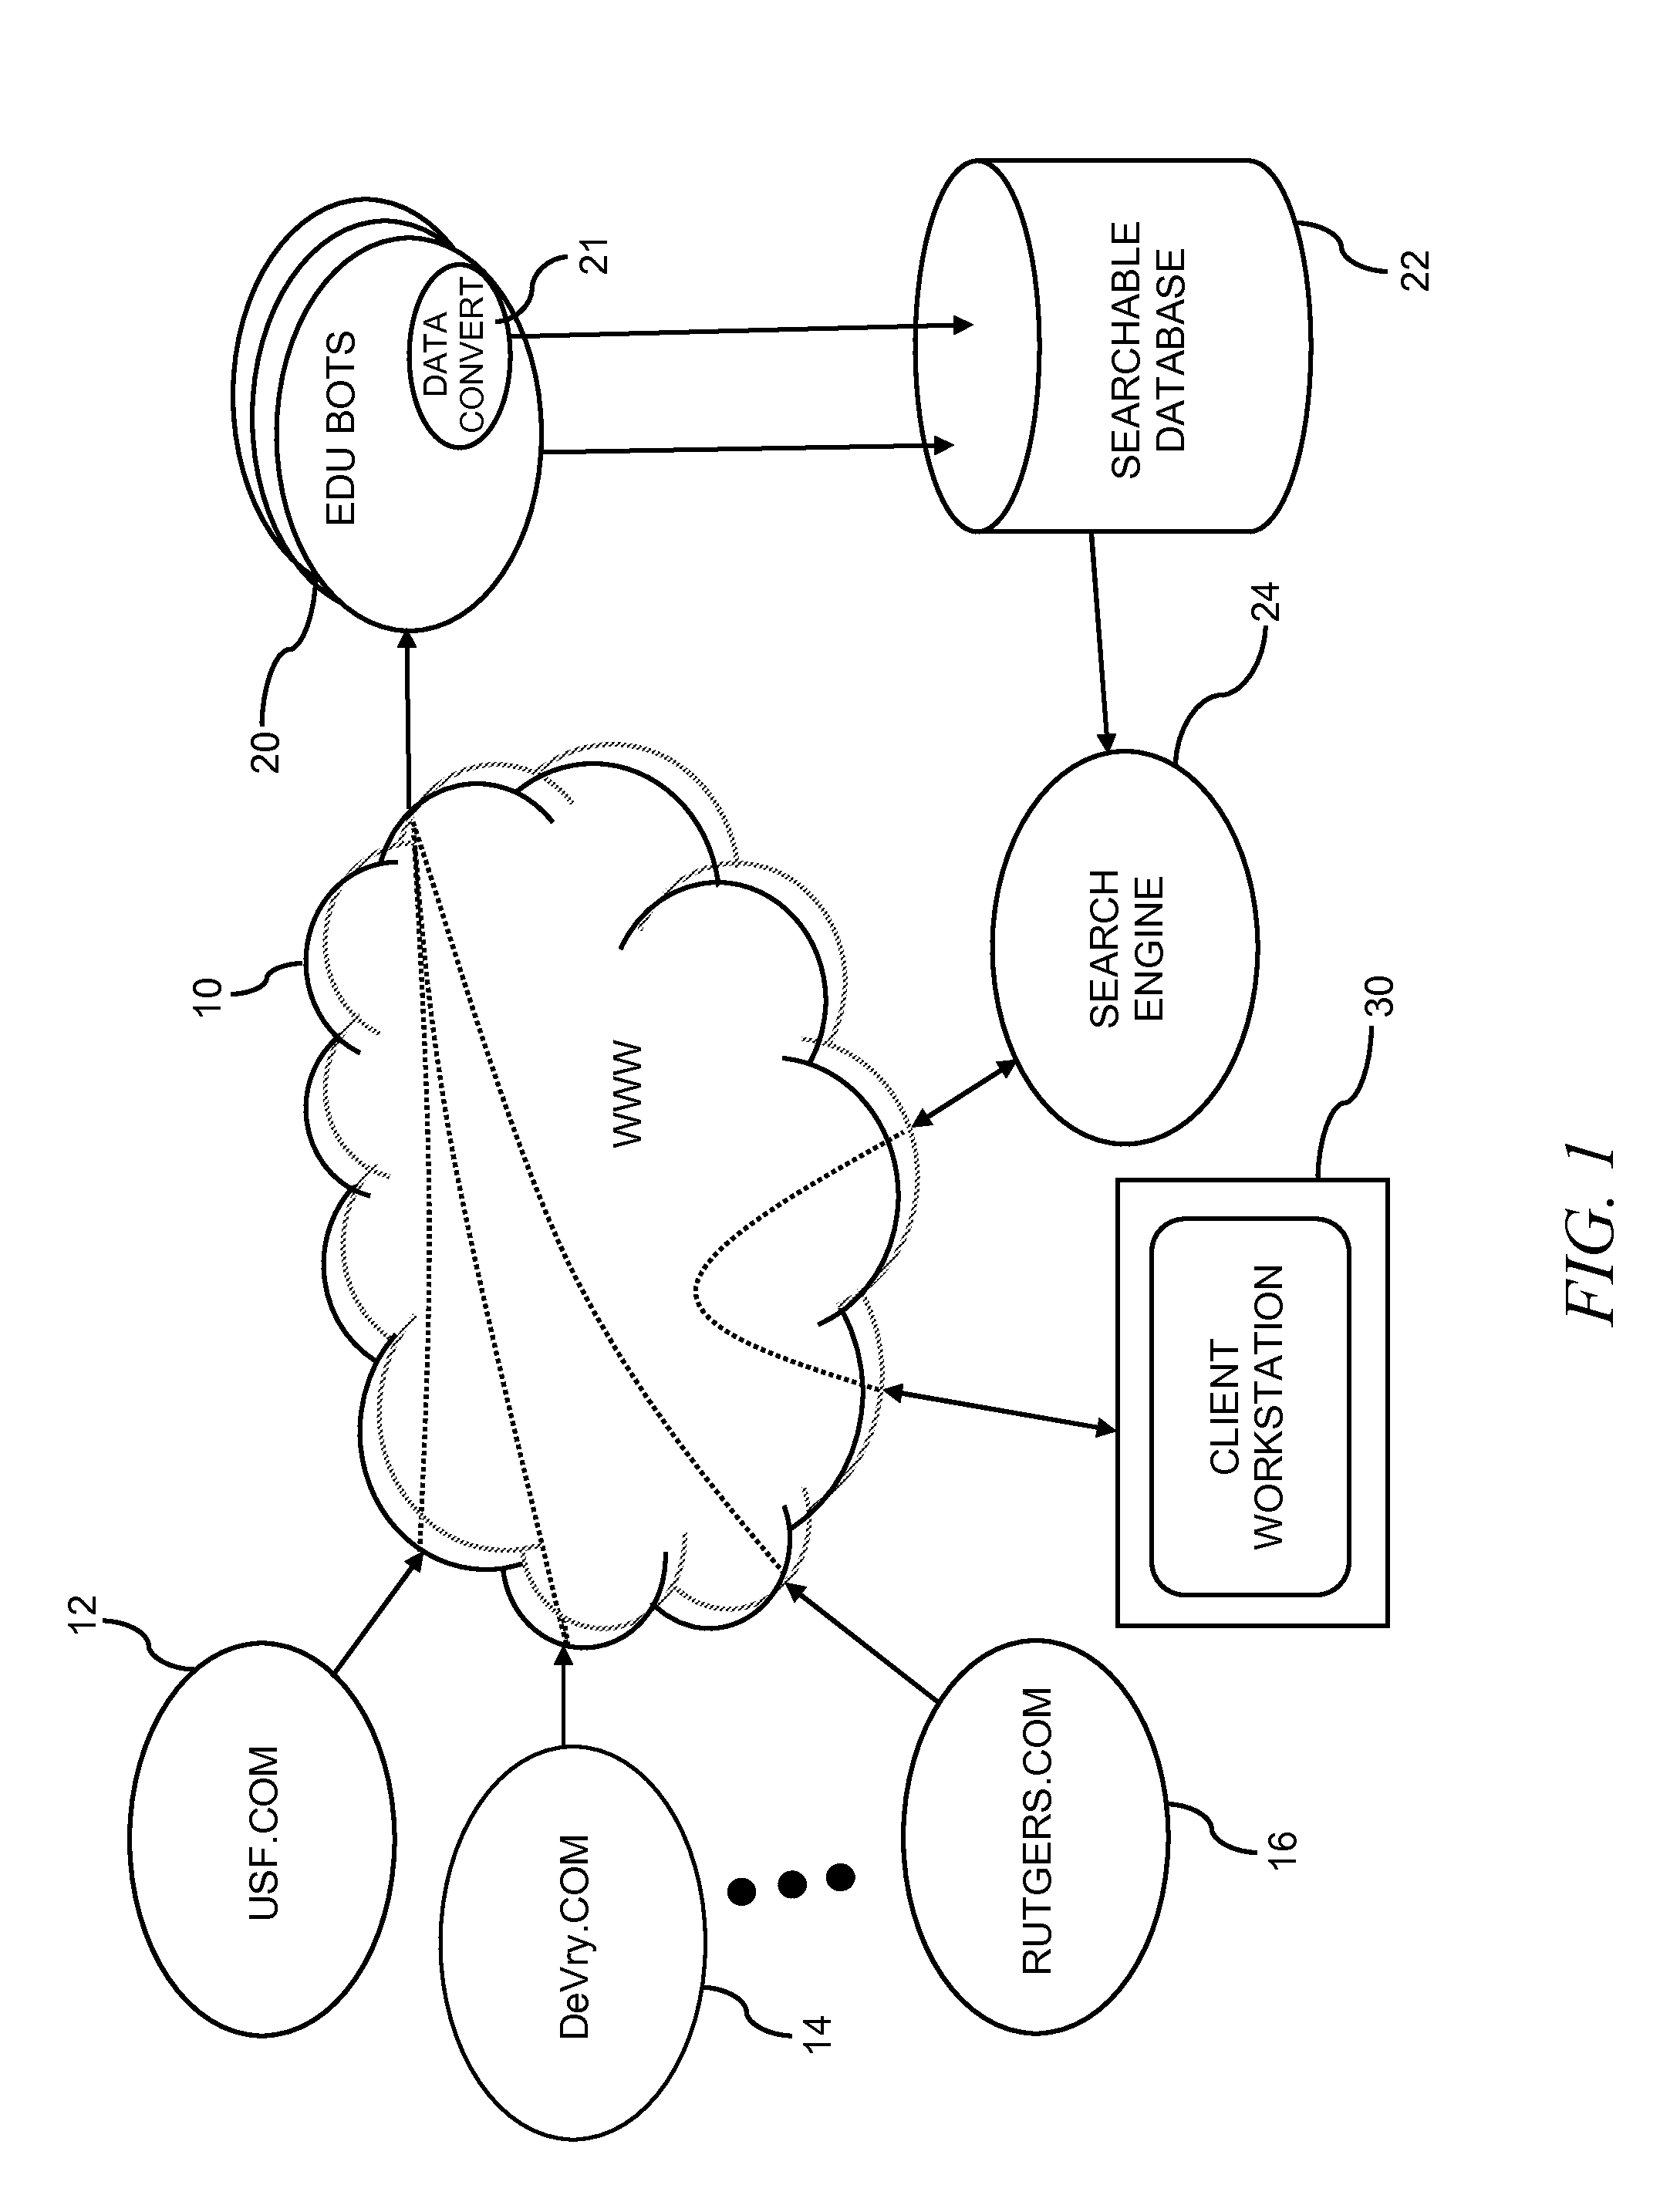 System, method and apparatus for consolidating and searching educational opportunities